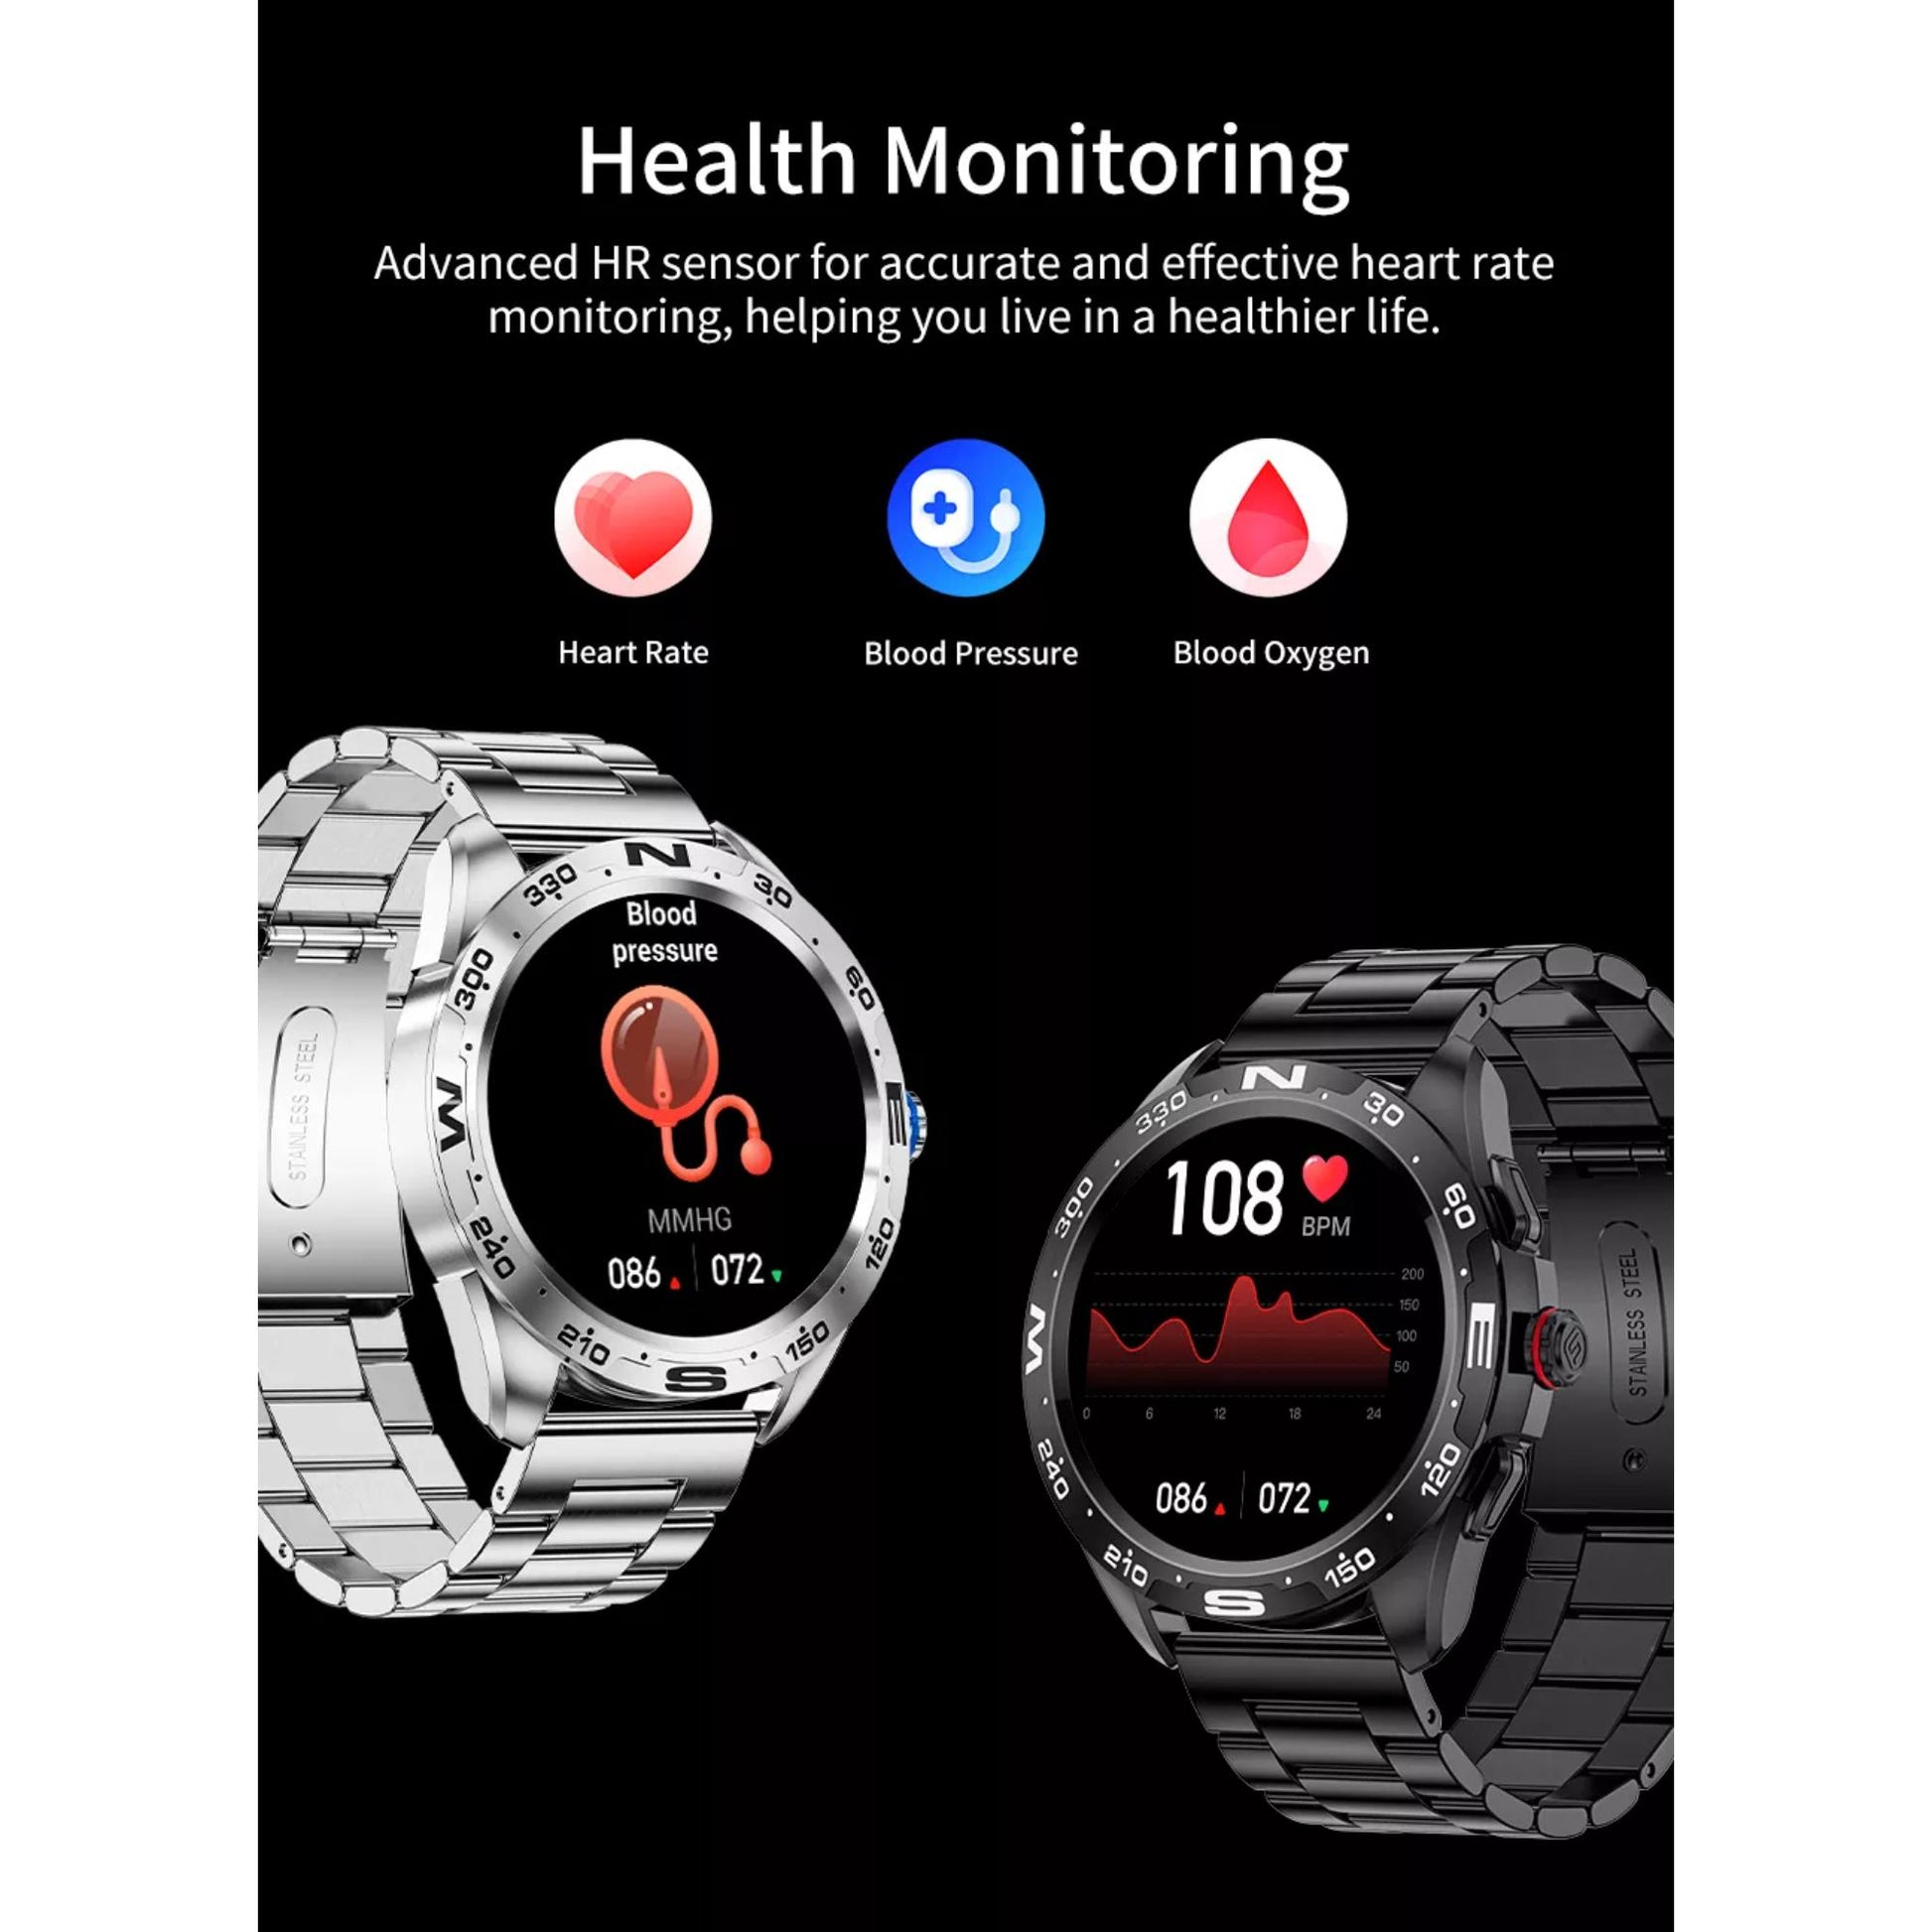 Monitor your health effectively with comprehensive health tracking features on the Lige BW0327 Smartwatch. | Blue Chilli Electronics.